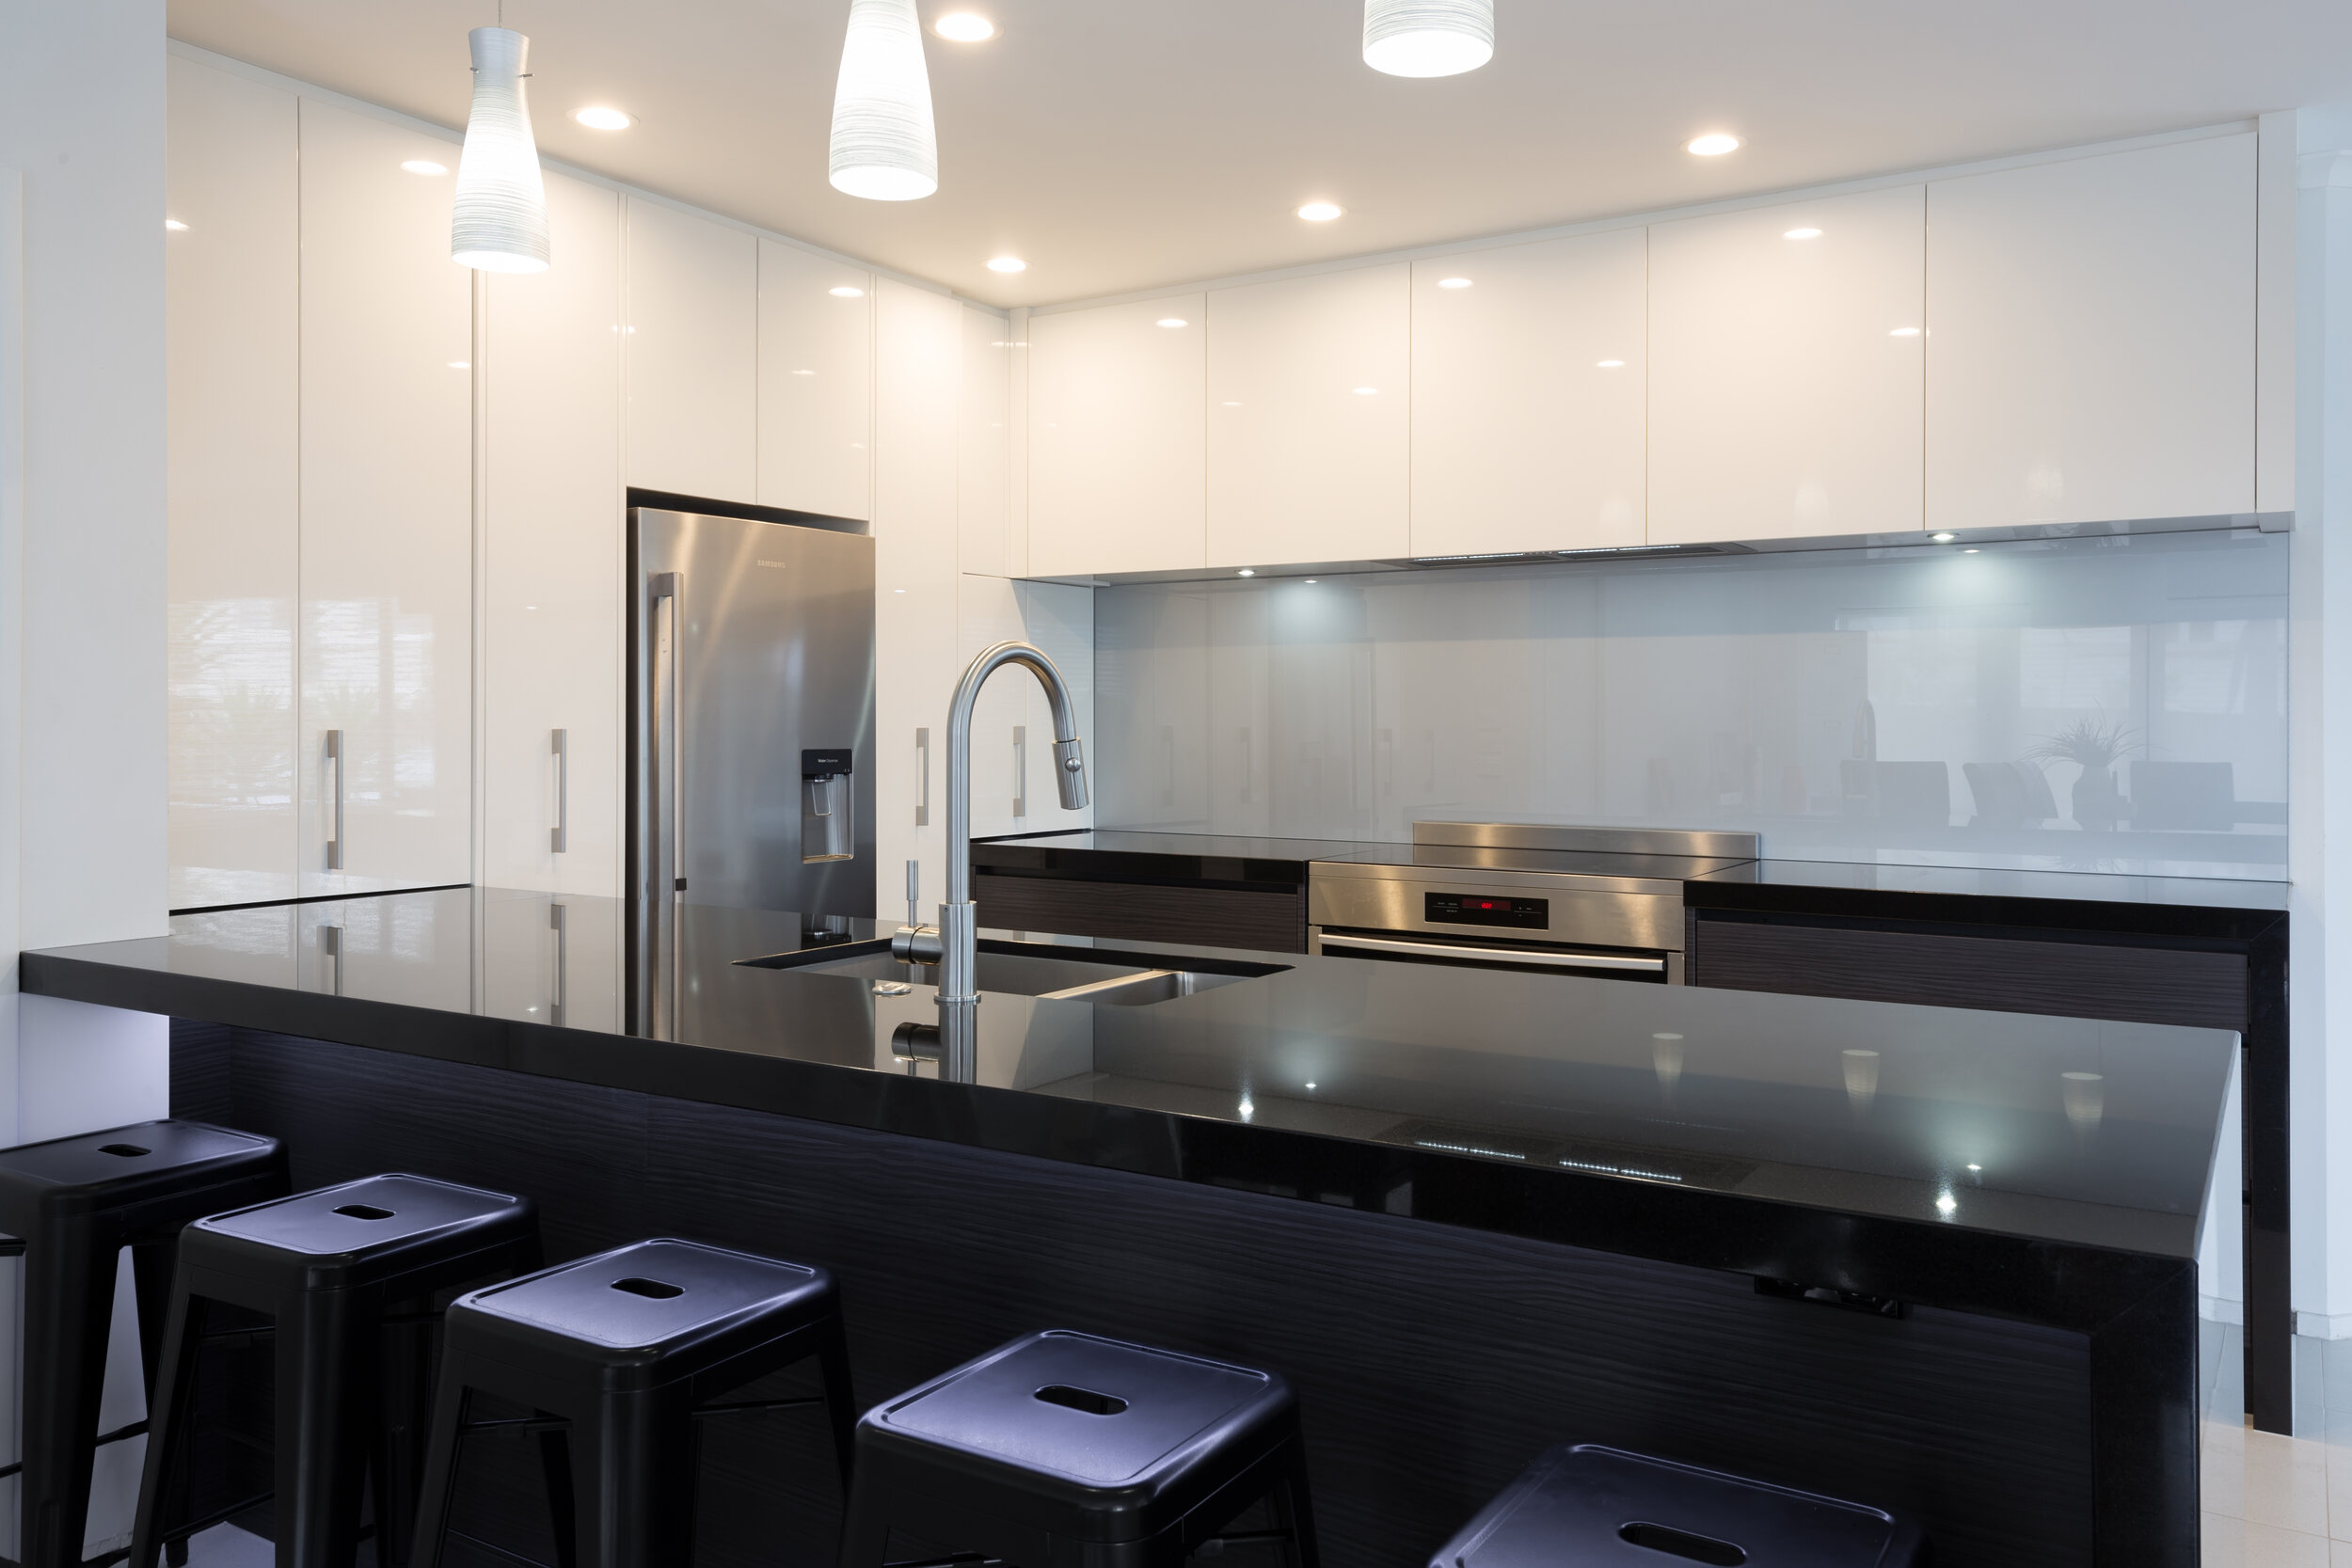 Award winning contemporary kitchen with grey-blue backpainted glass splashback